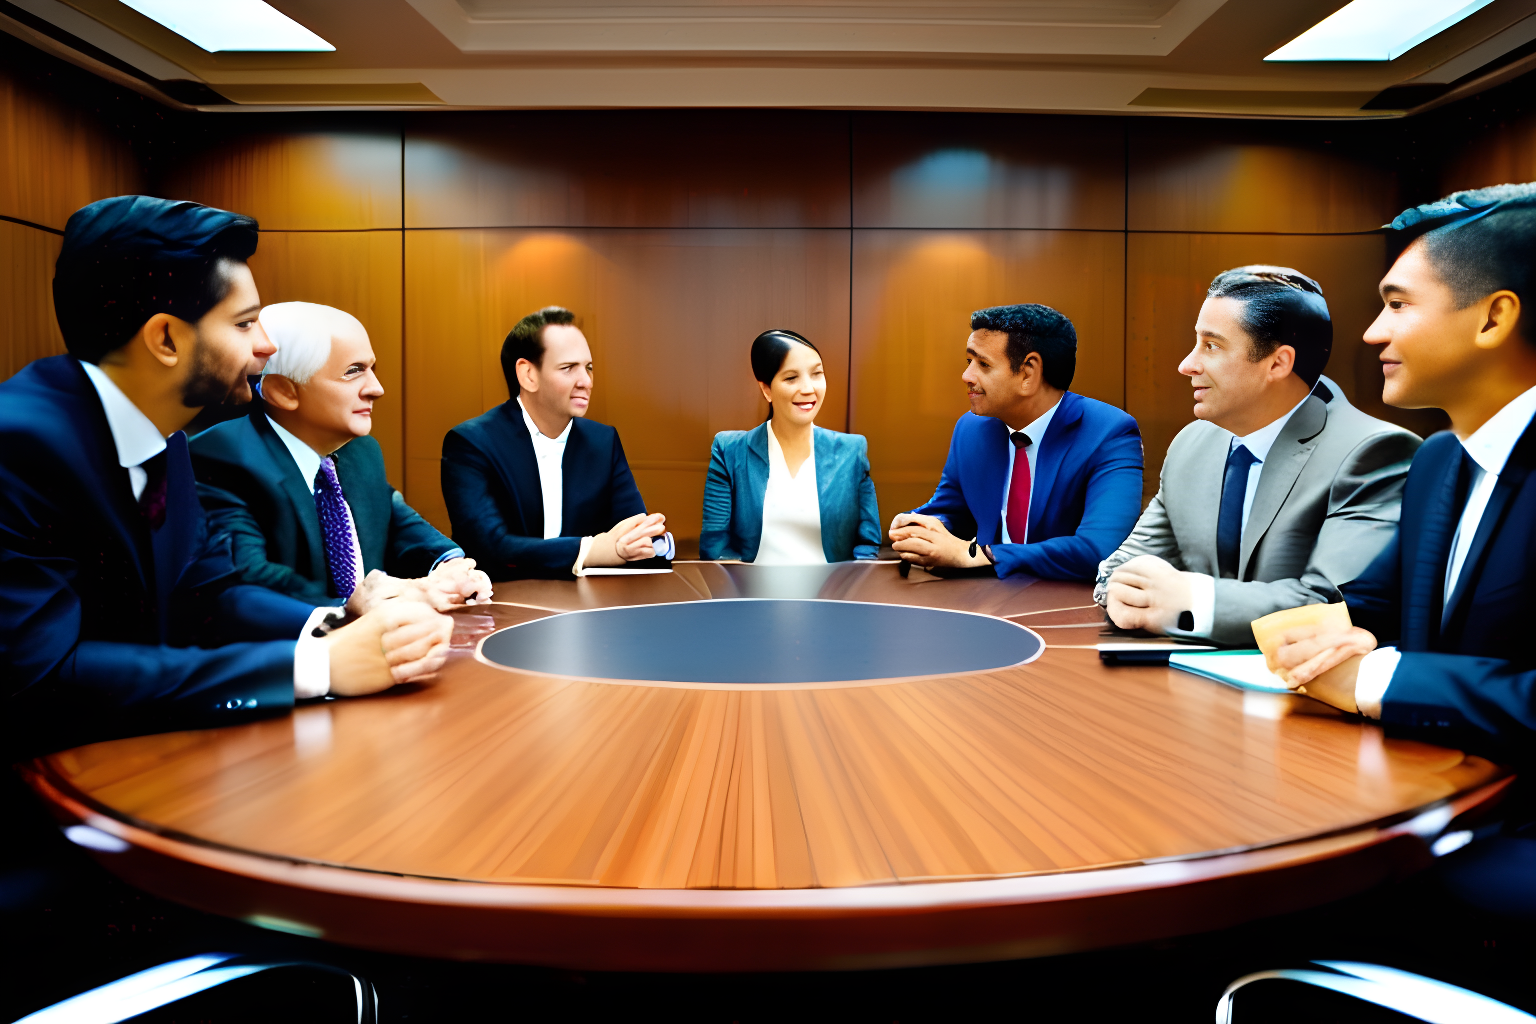 a group of people in suits talking on a round table